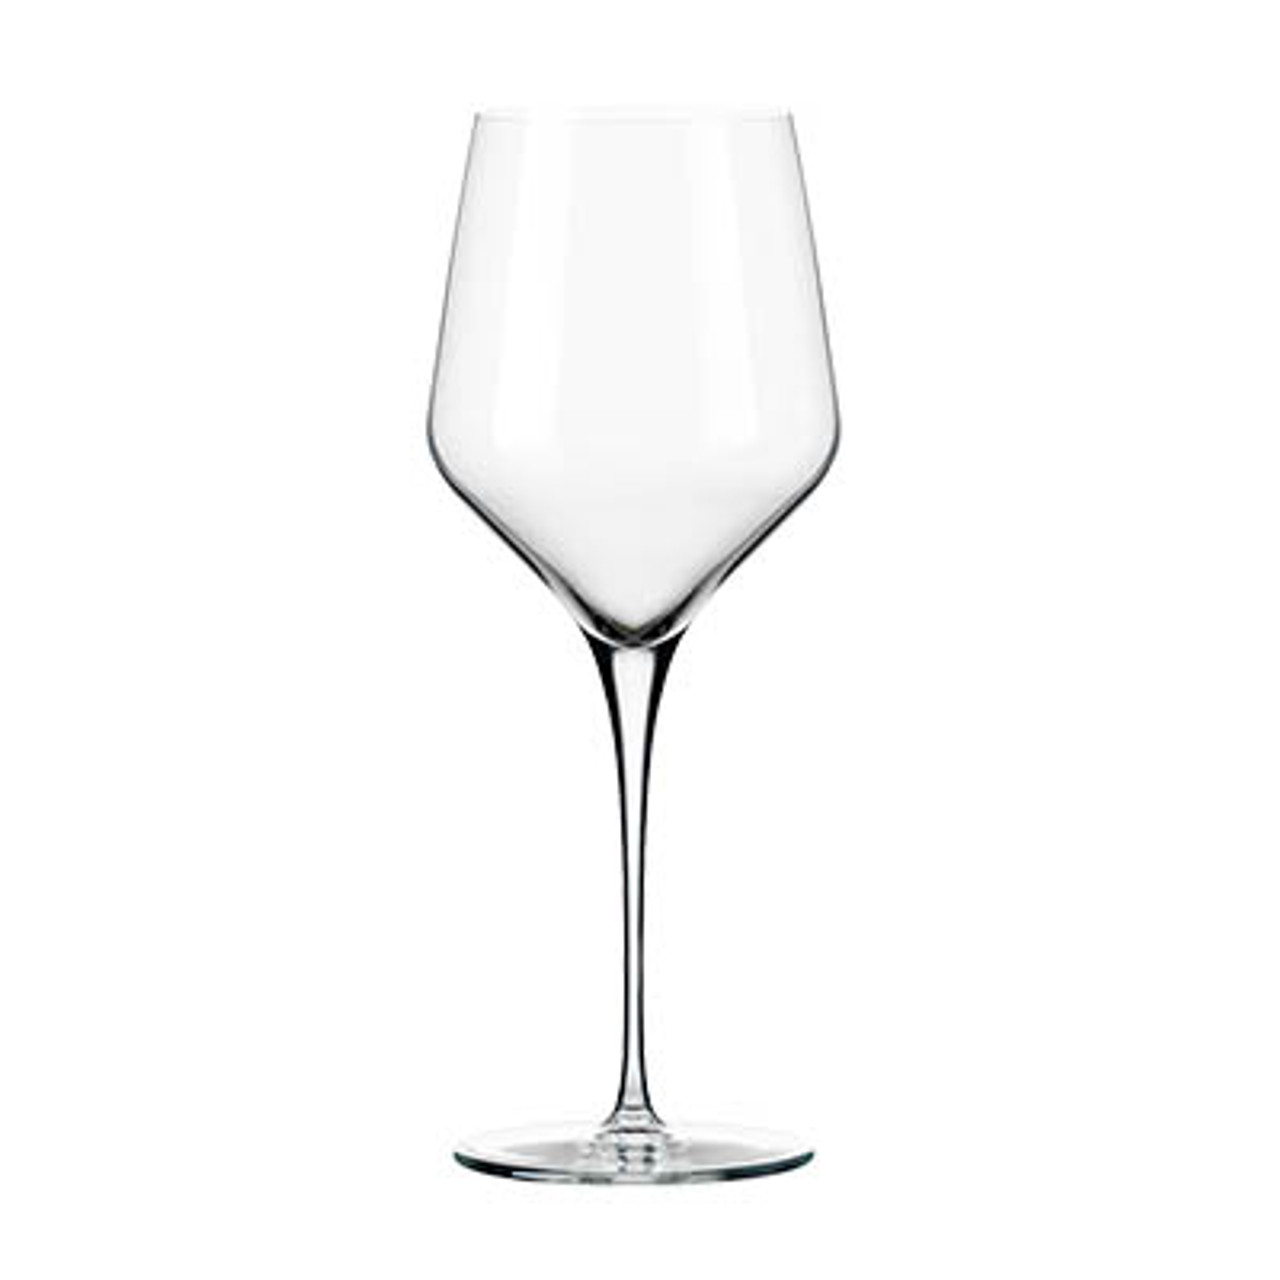 https://cdn11.bigcommerce.com/s-g3i86bef61/images/stencil/1280x1280/products/1270/4276/Libbey-9322-Wine-Glass__30861.1667509545.jpg?c=1